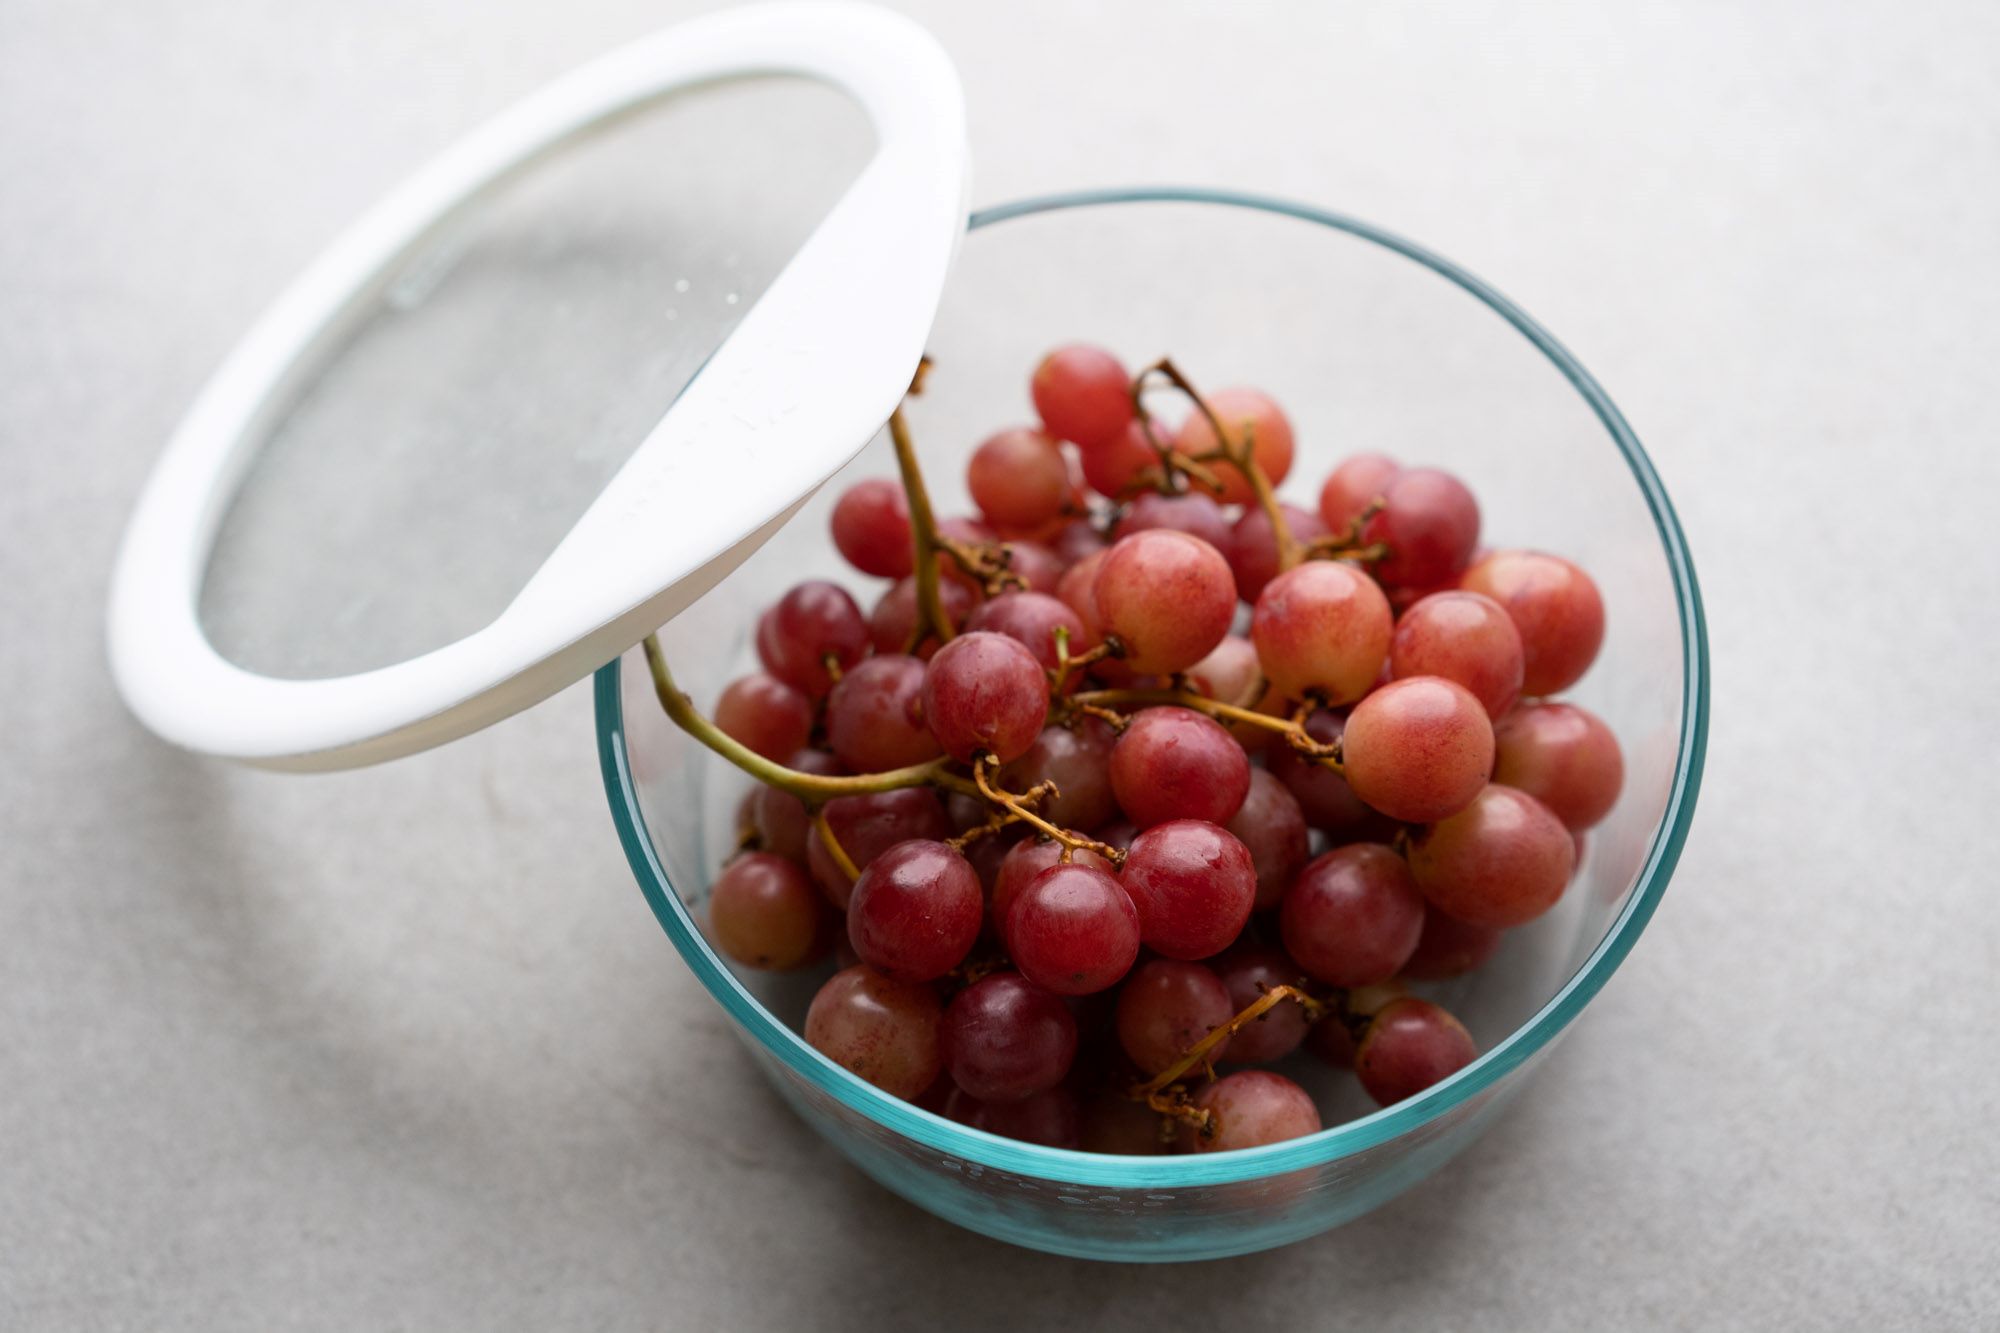 How To Store Grapes After Washing